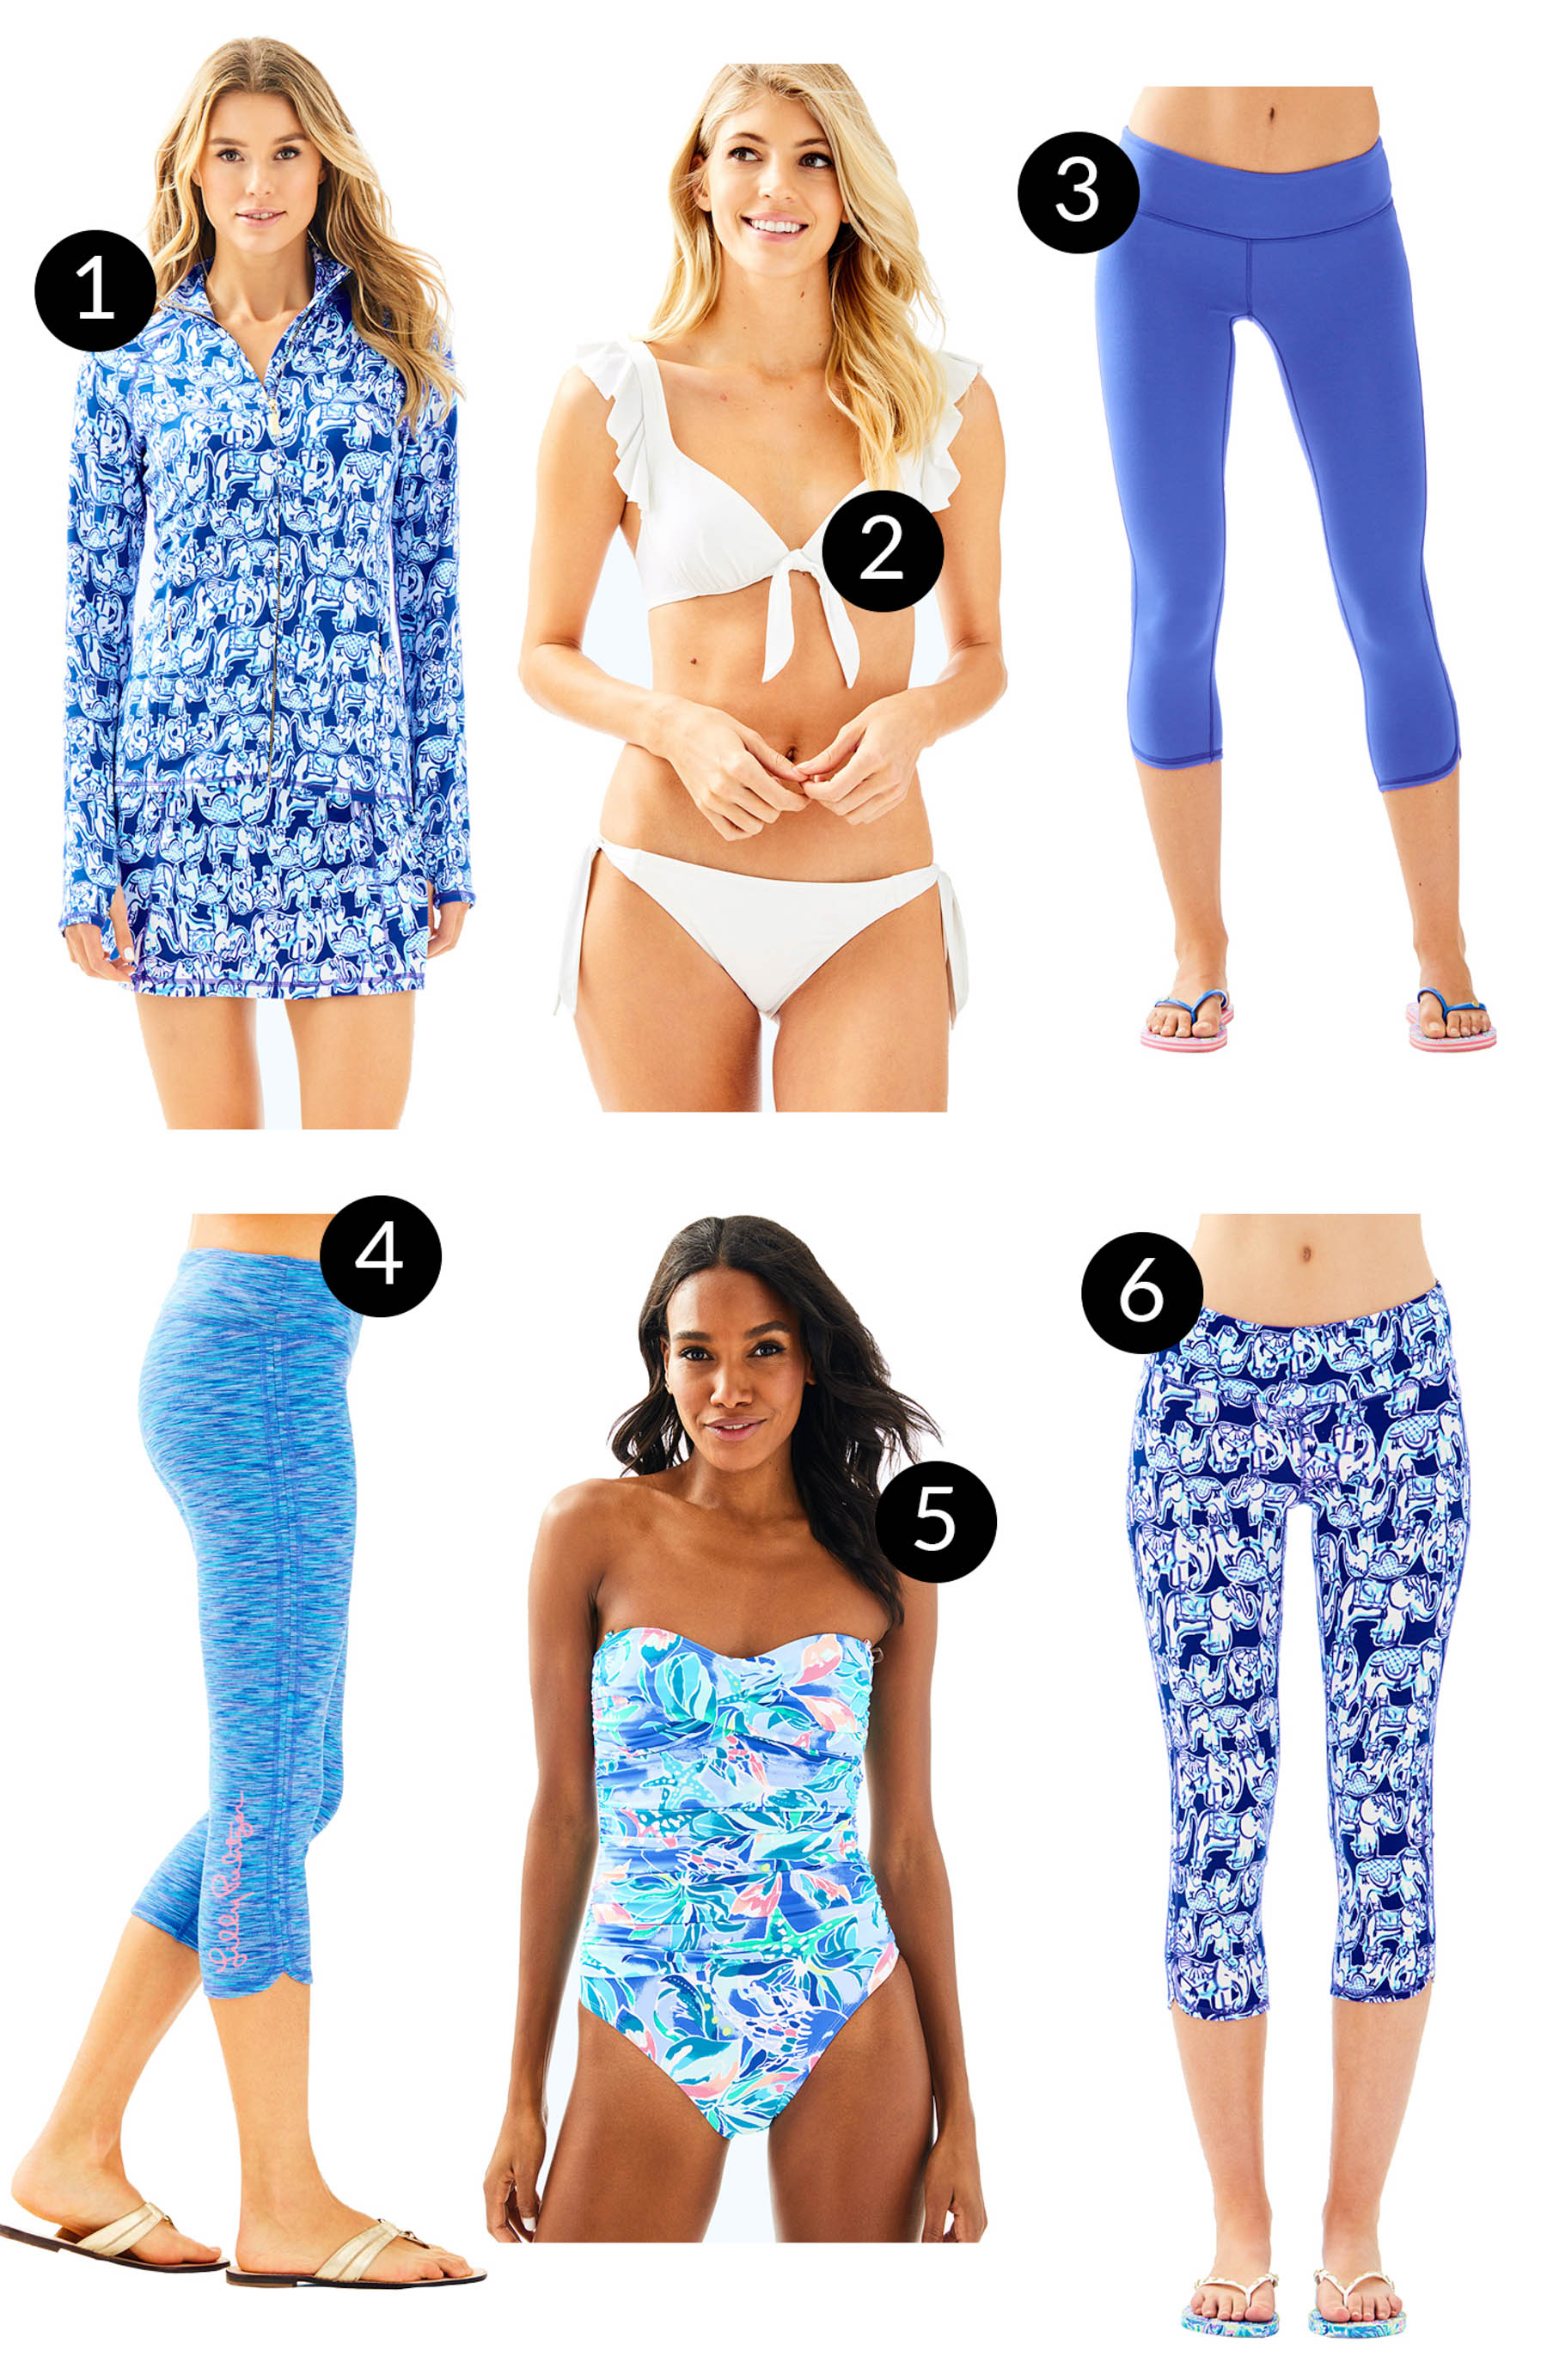 Swim + Luxletic - Lilly Pulitzer After Party Sale